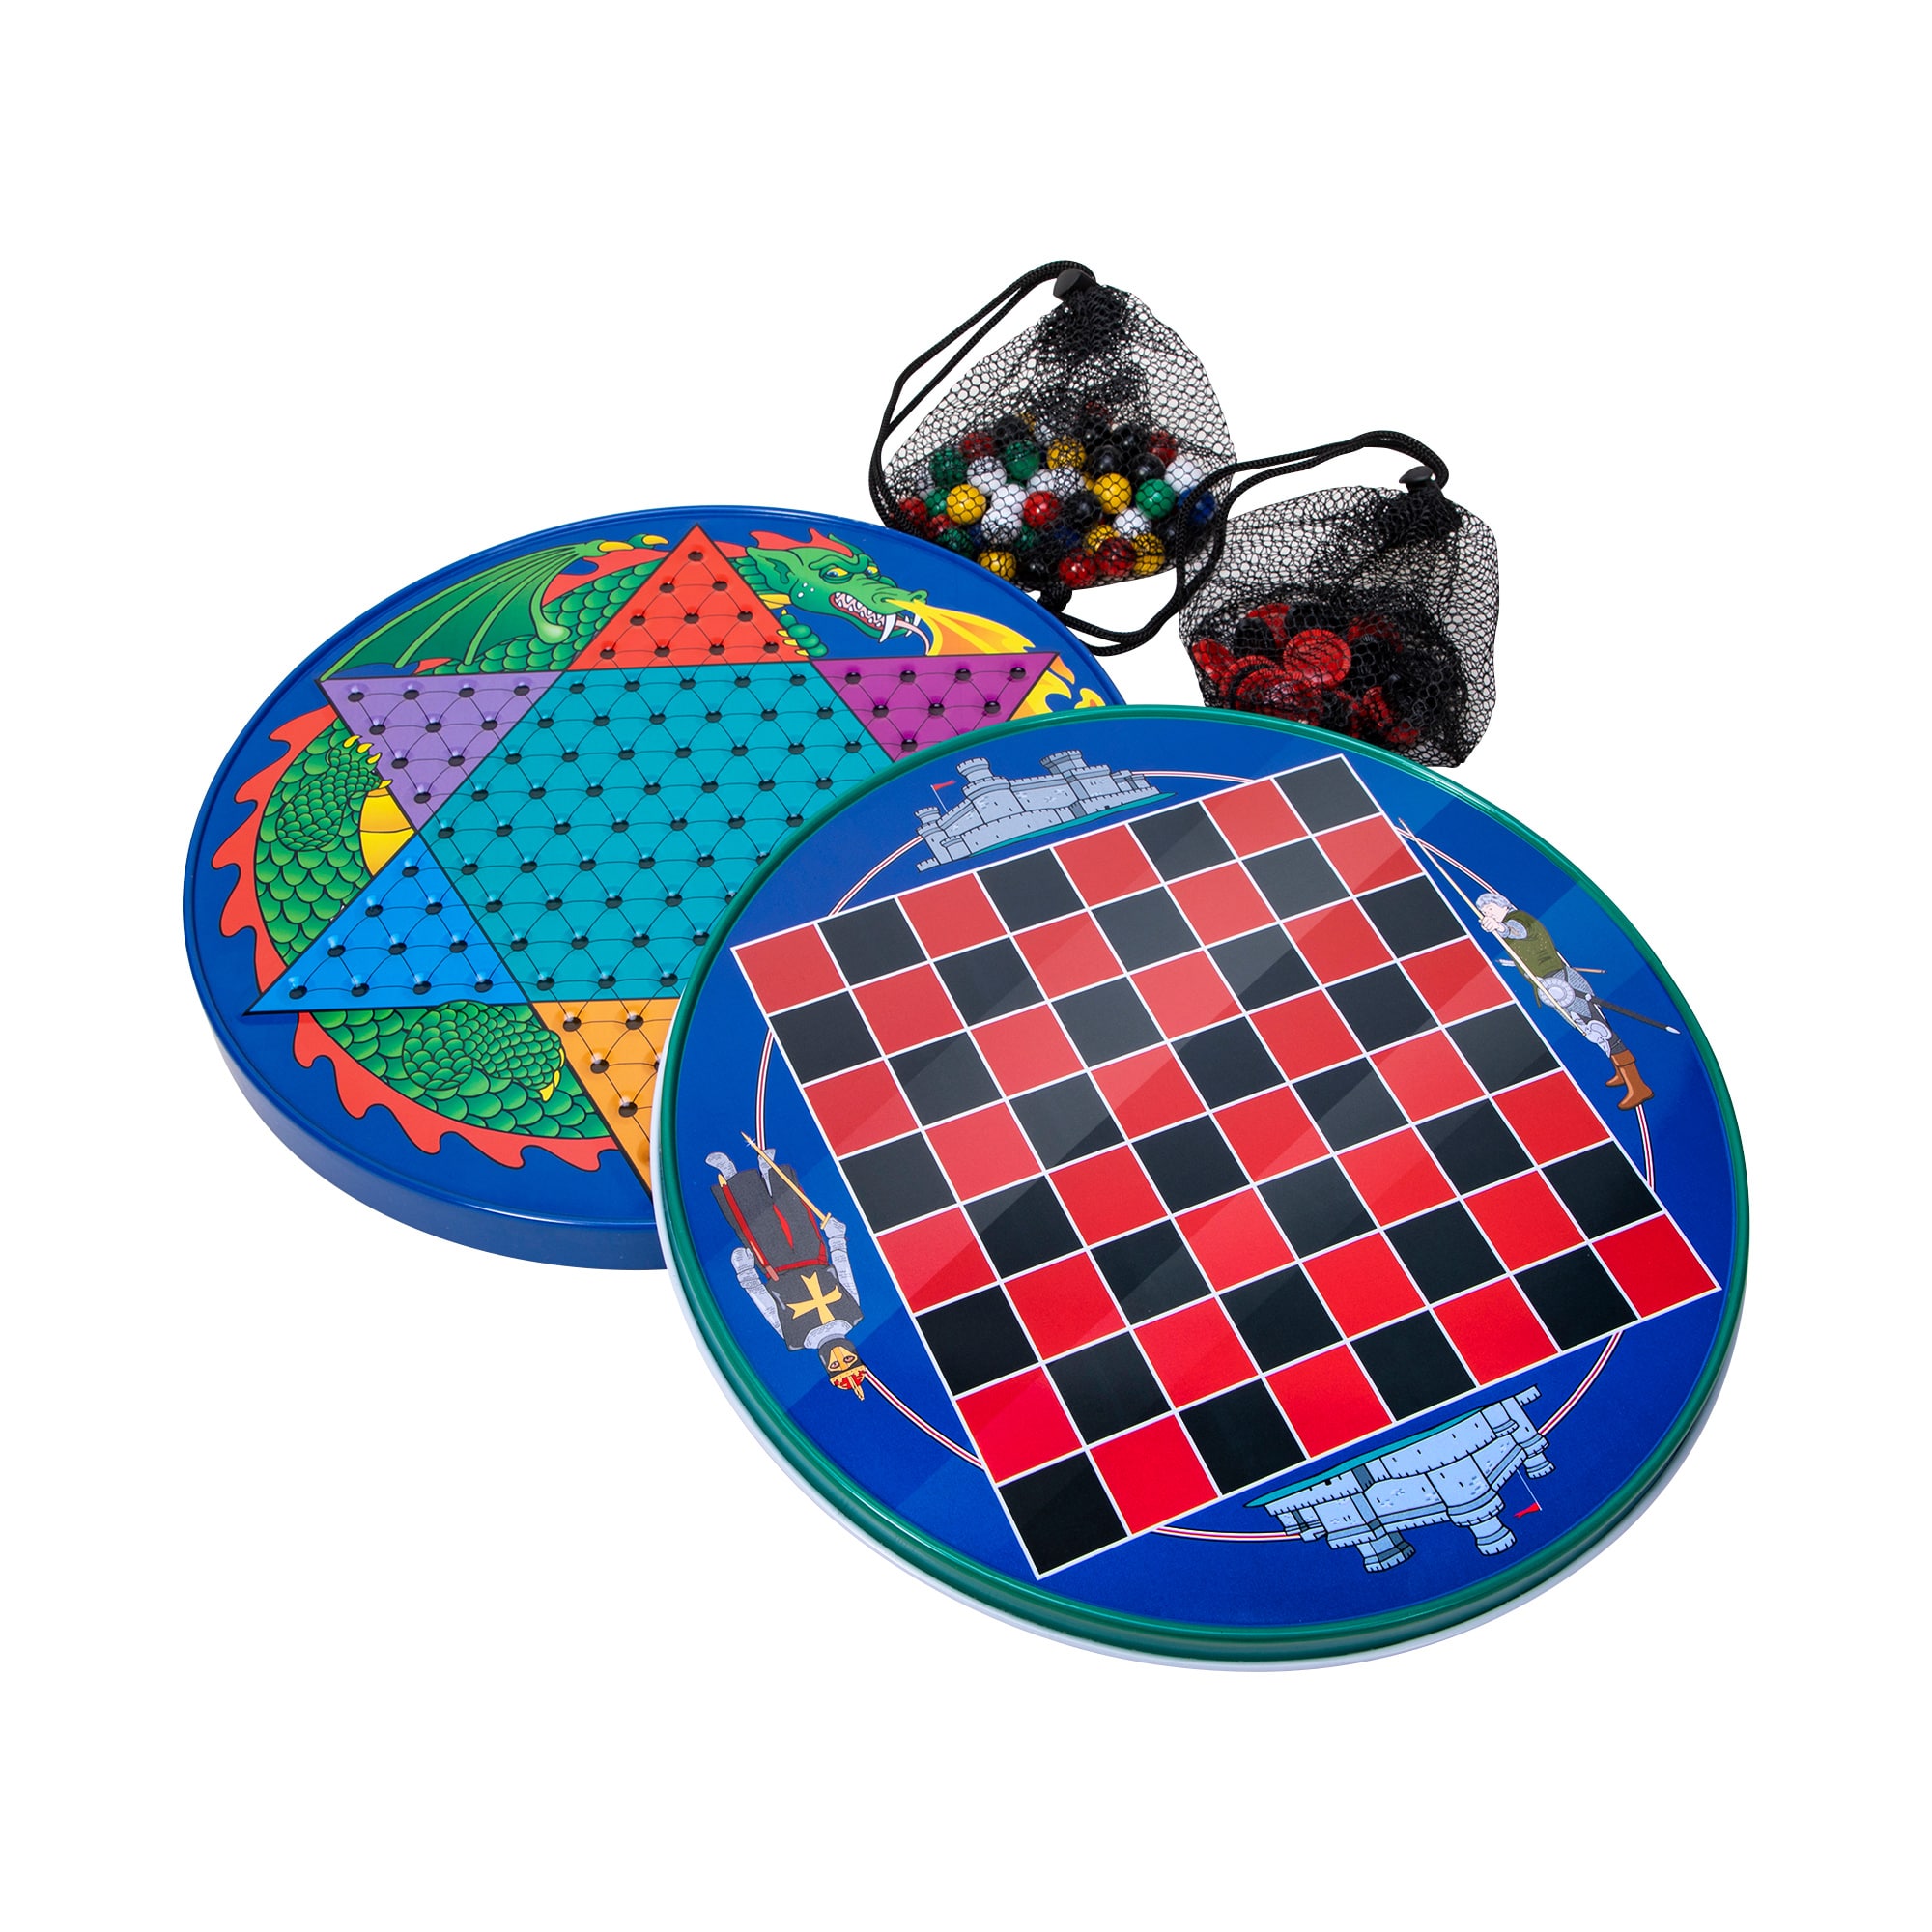 CCH-Chinese-Checkers-Contents-Flat-web.jpg